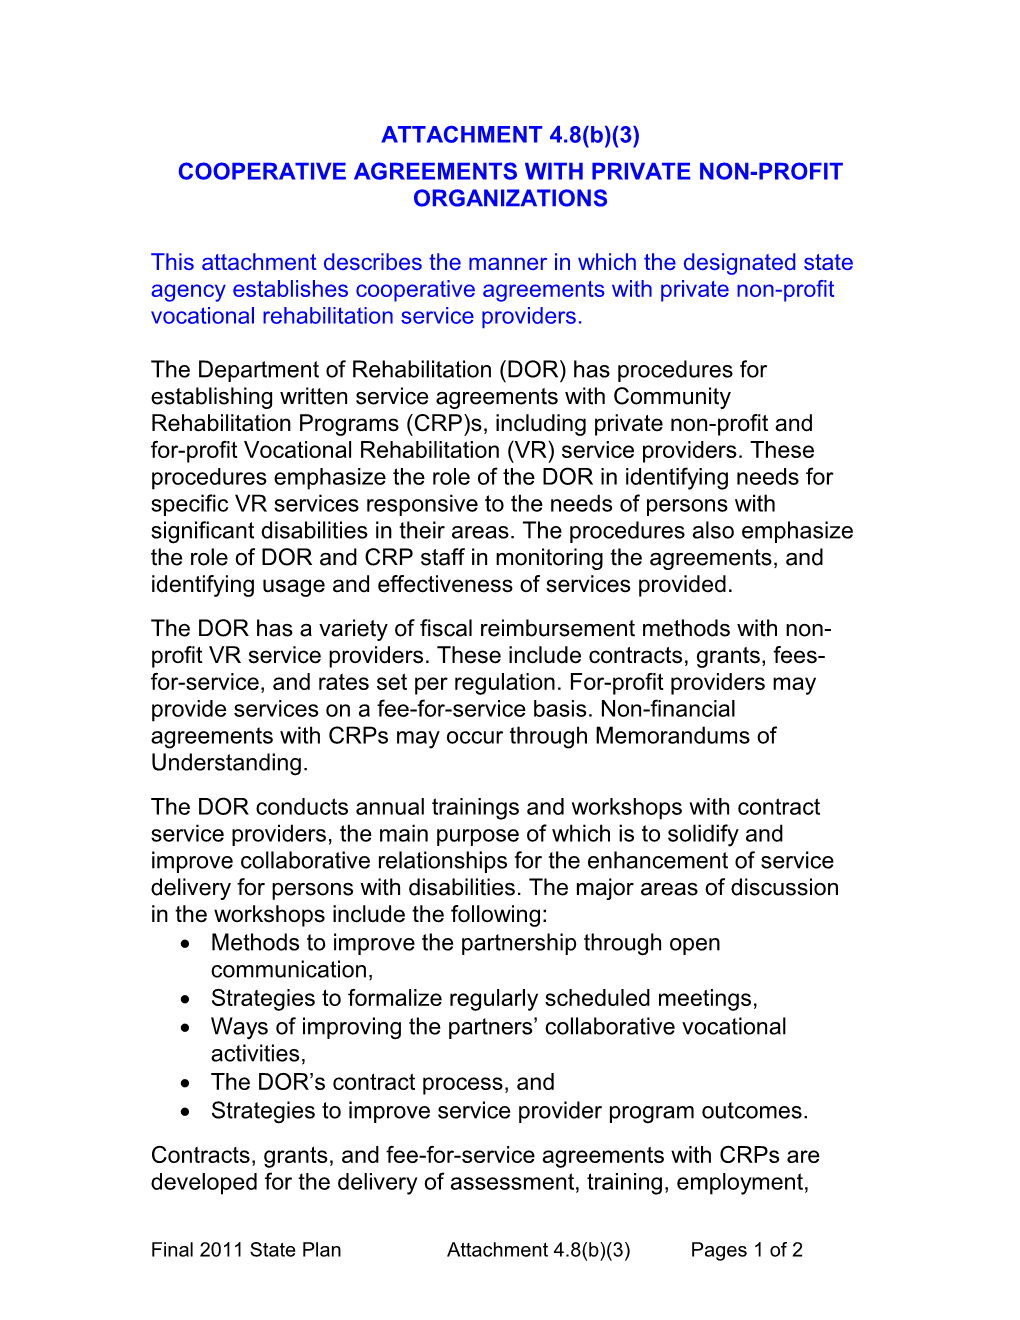 Cooperative Agreements with Private Non-Profit Organizations